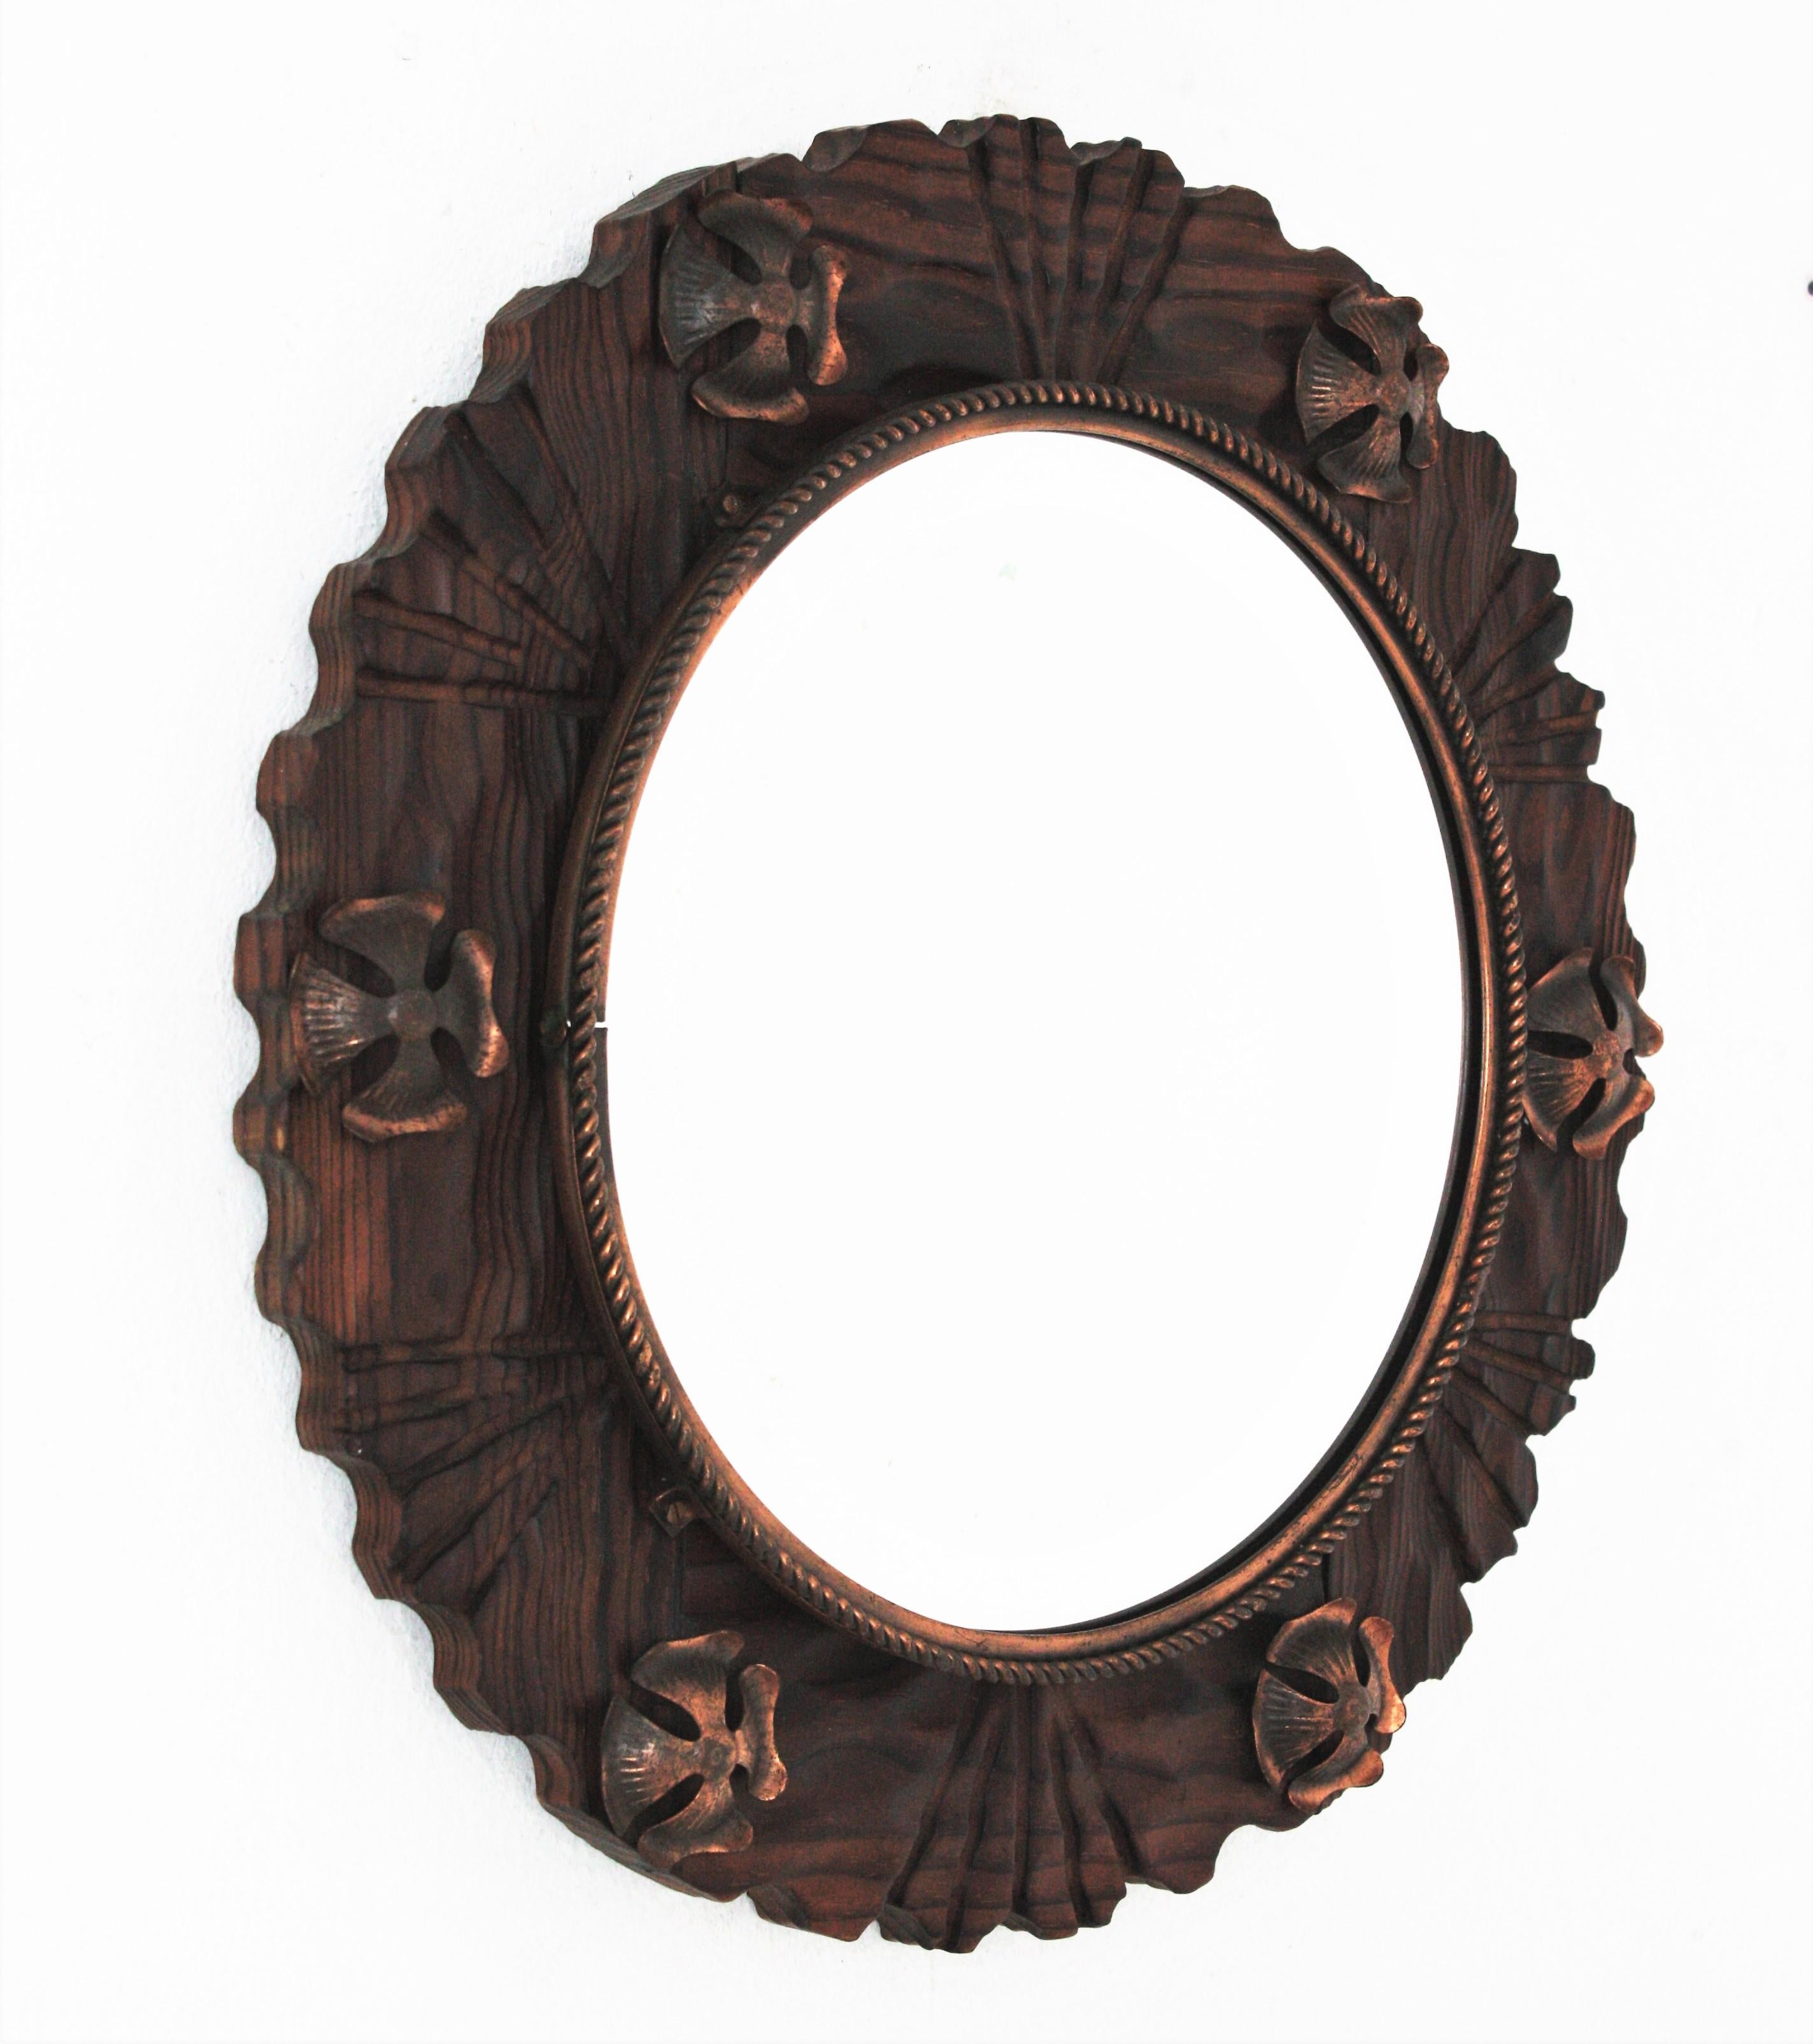 Hand-Crafted Spanish Colonial Wall Mirror in Carved Wood with Metal Flowers